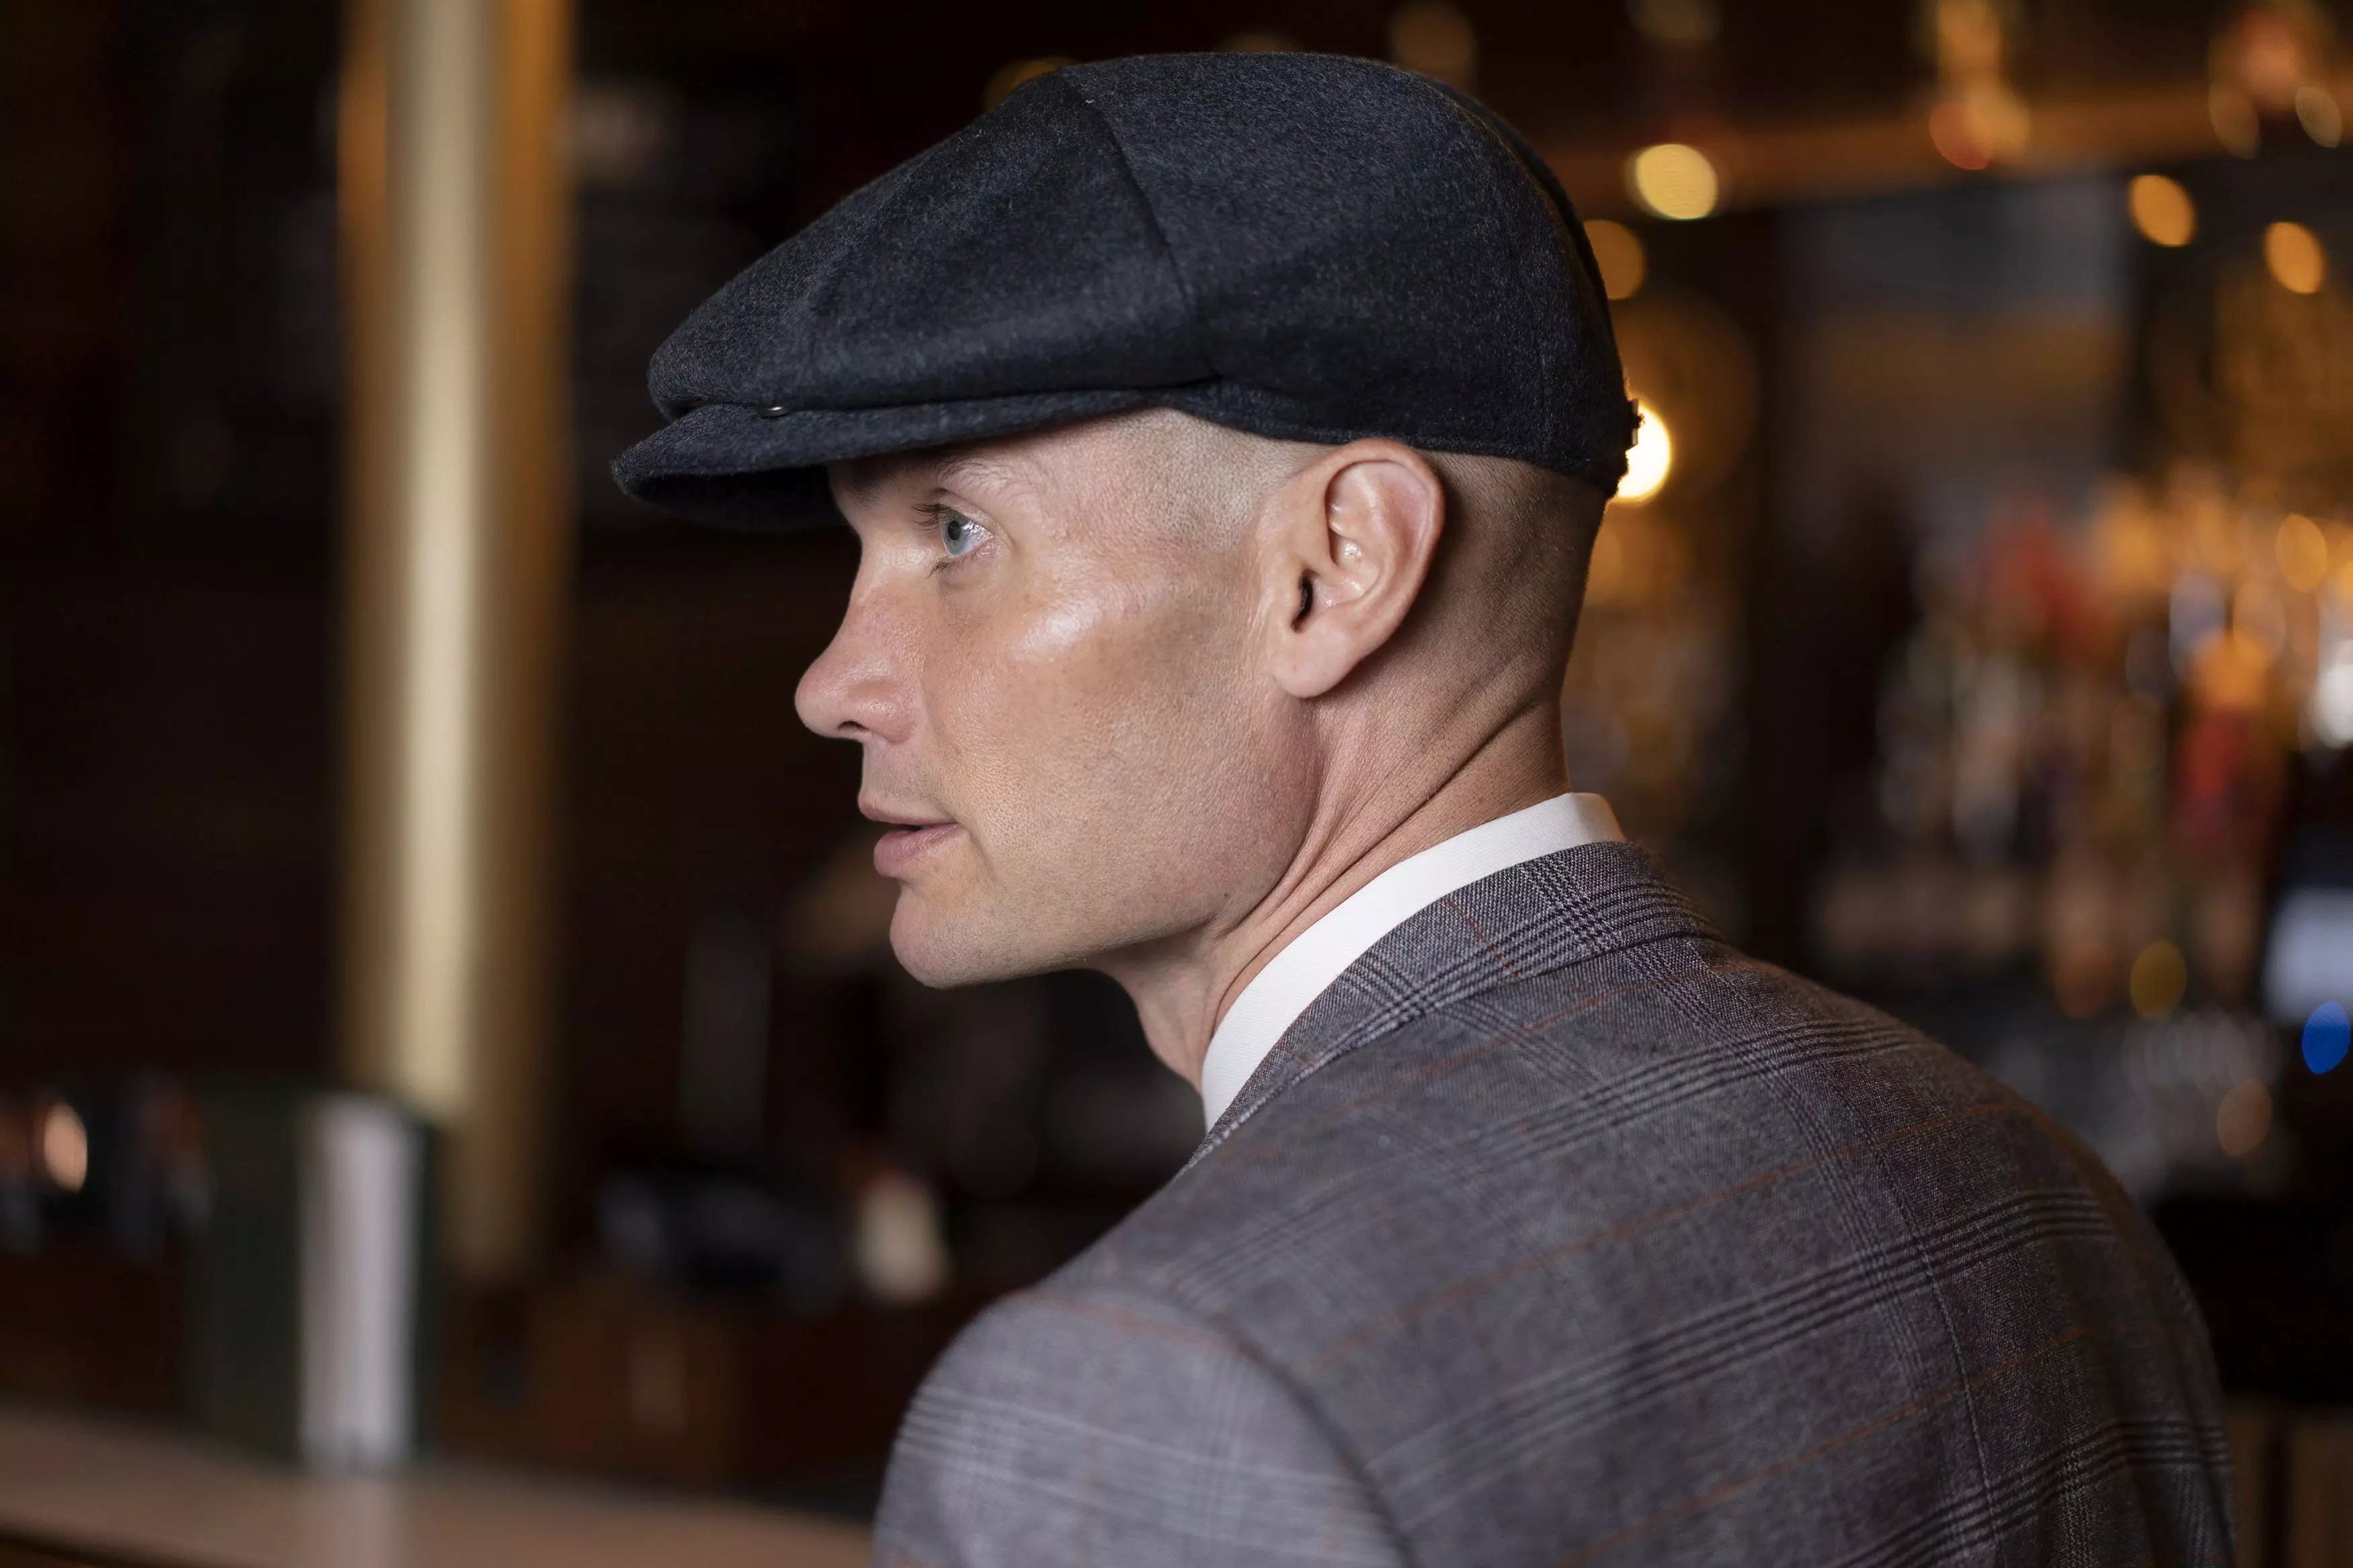 Scott says he gets a lot of attention when he's out dressed as Tommy Shelby.